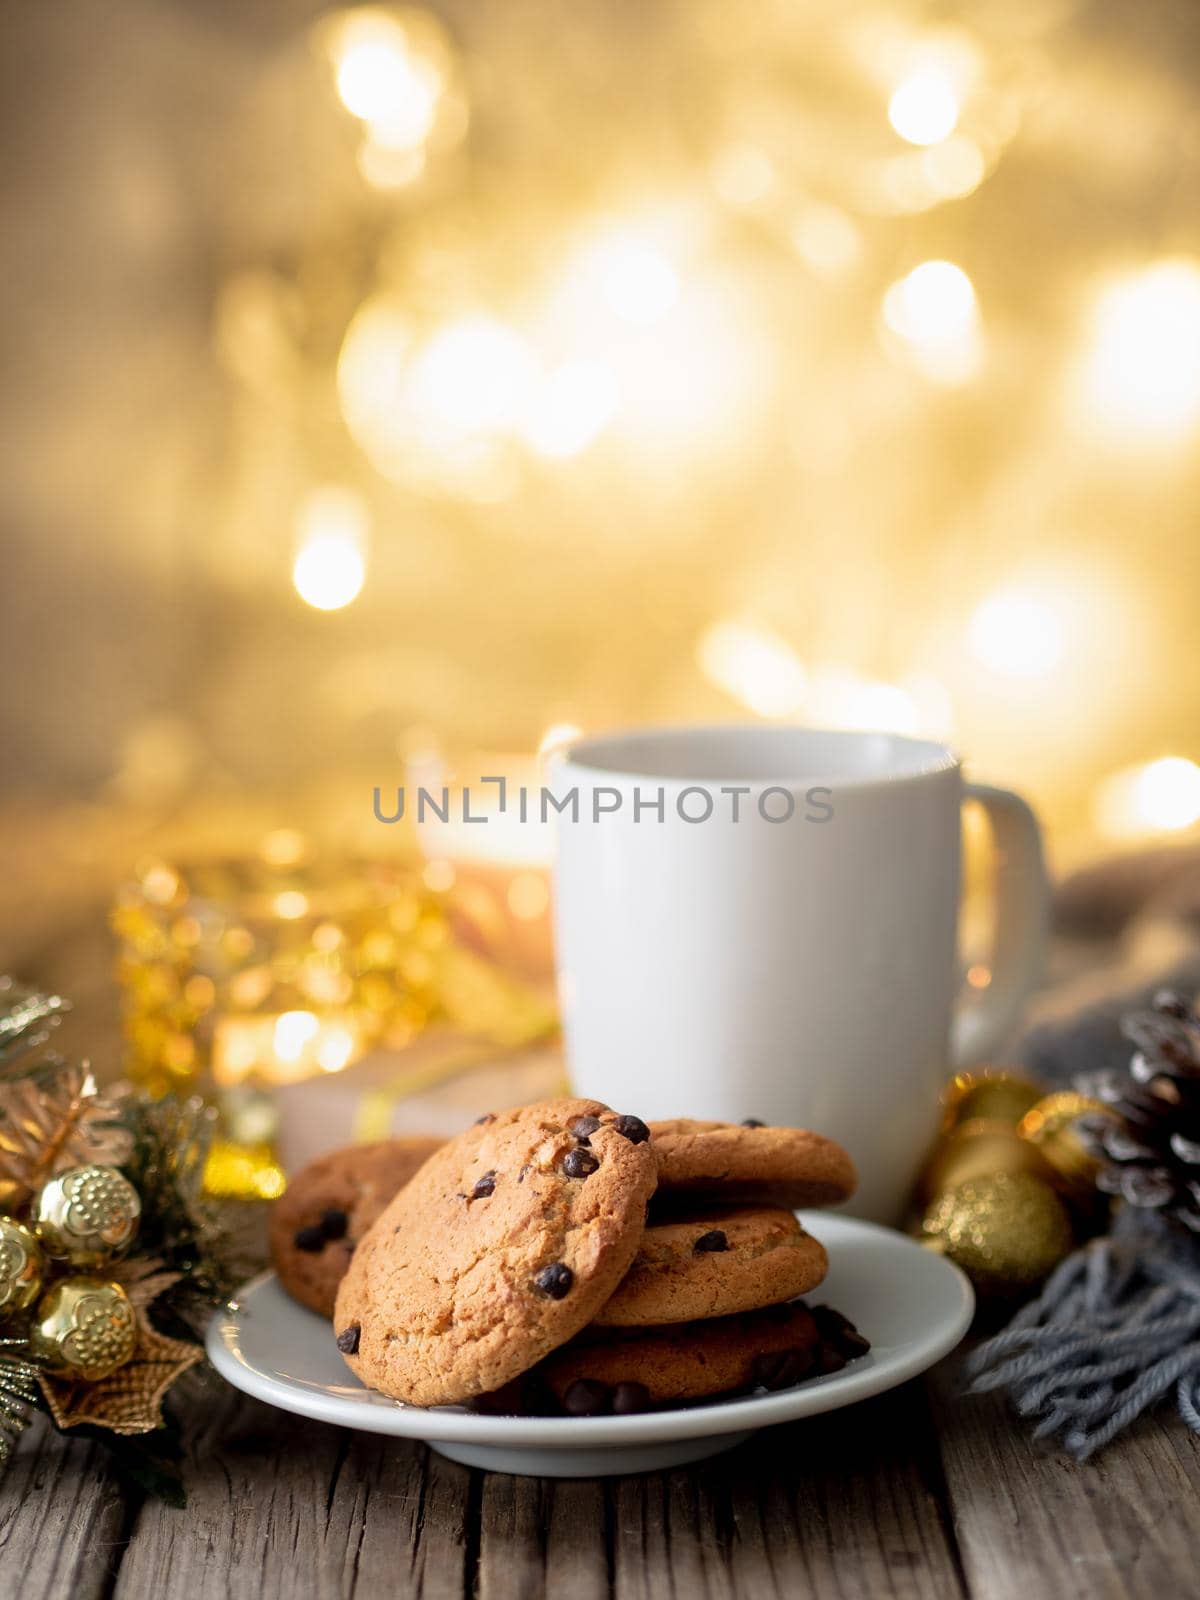 Christmas background with Chocolate chip cookies, cup of tea. Cozy evening, mug of drink, Christmas decorations, candles and lights garlands.